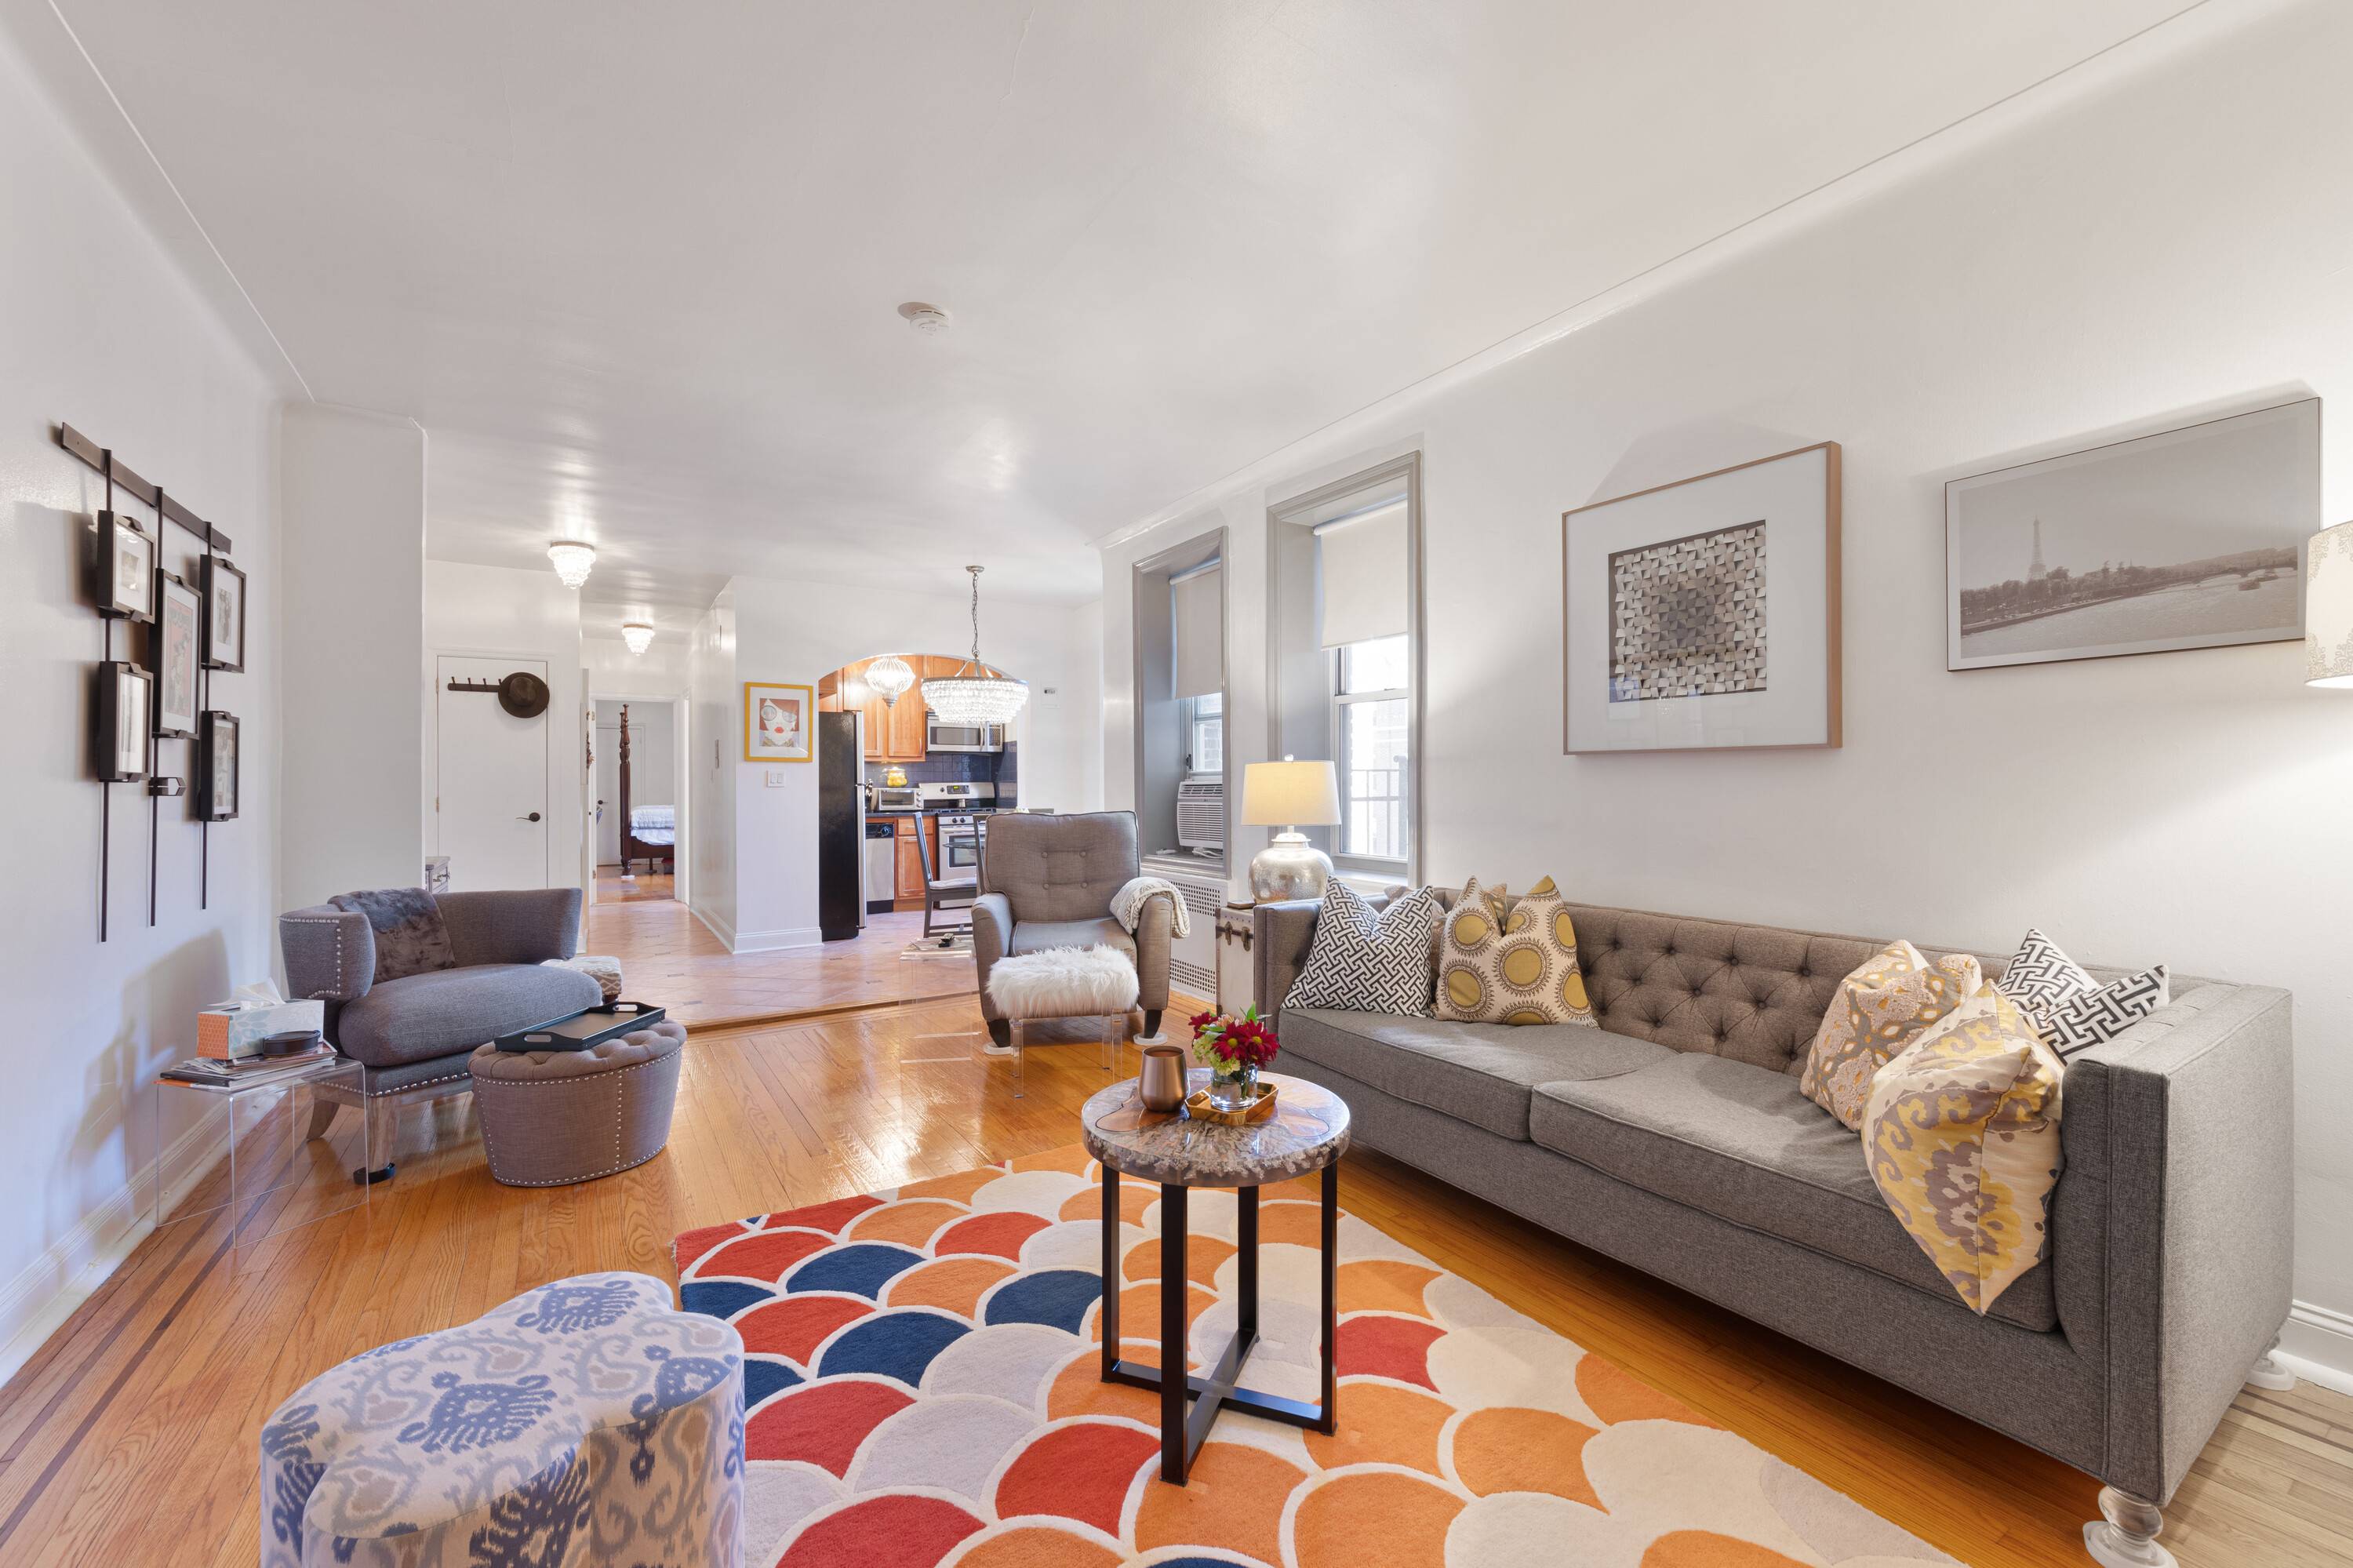 Yes! A pre-war mint renovated one bedroom CONDO in the Jackson Heights Historic/Landmark district under 550k DOES exist!